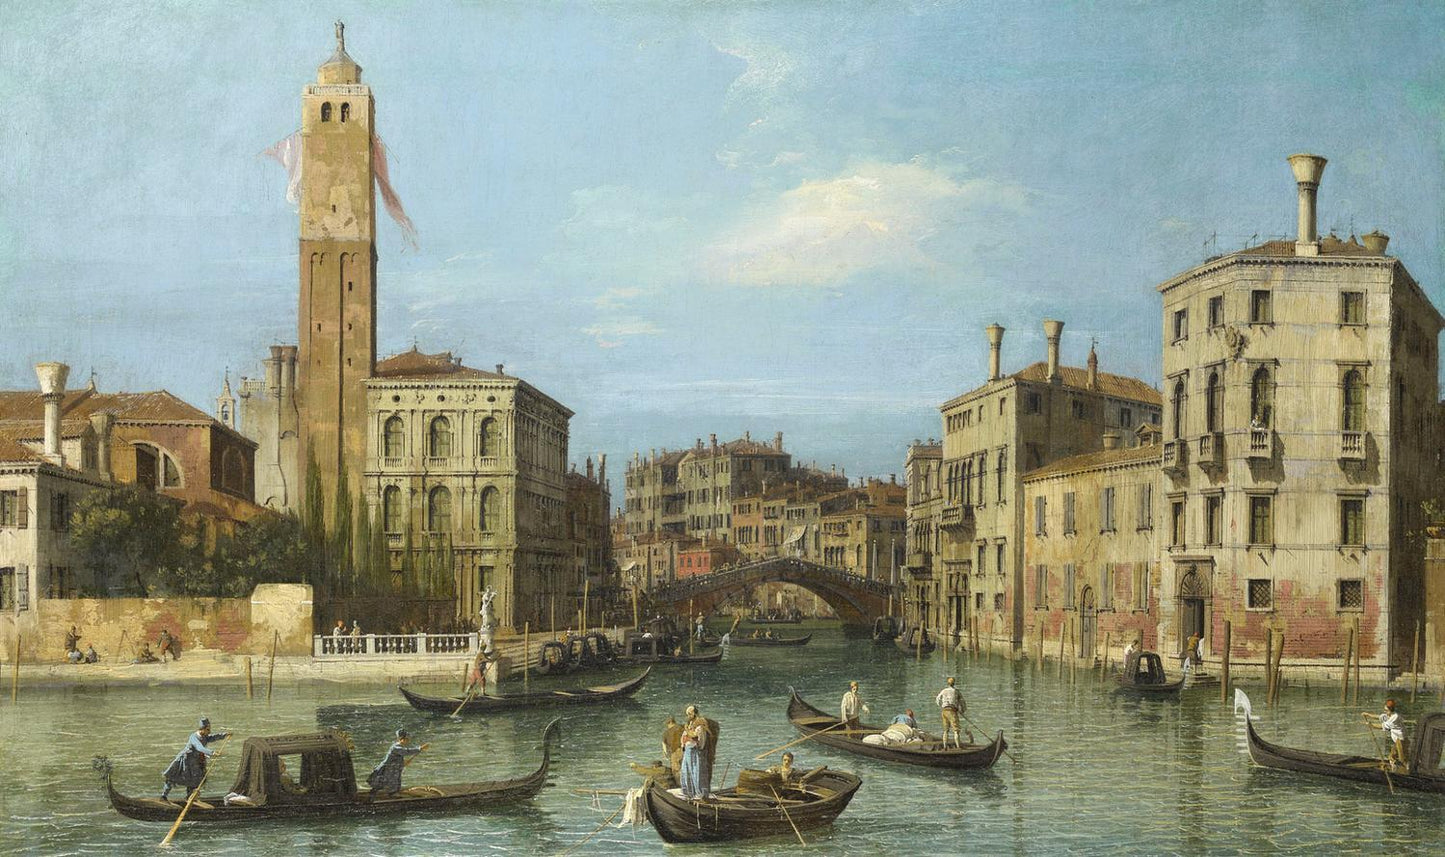 S. Geremia and the Entrance to the Cannaregio, Canaletto